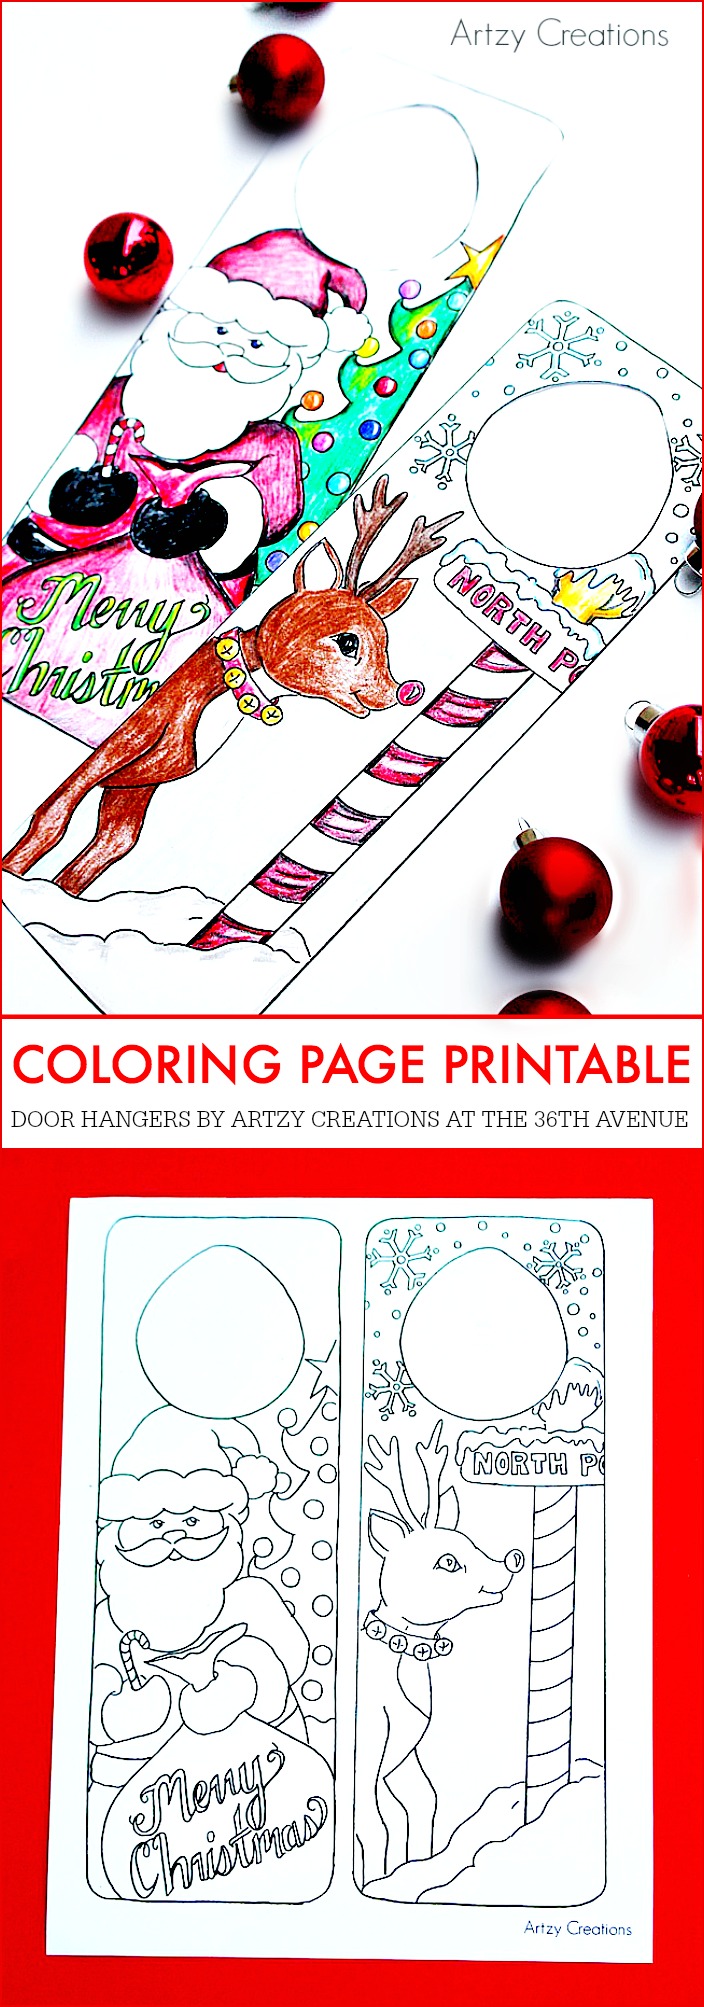 Kid Christmas Crafts - Print this adorable Christmas Coloring Page and help the kiddos make festive door hangers for their bedrooms. They will love this craft idea! PIN IT NOW and print it later!